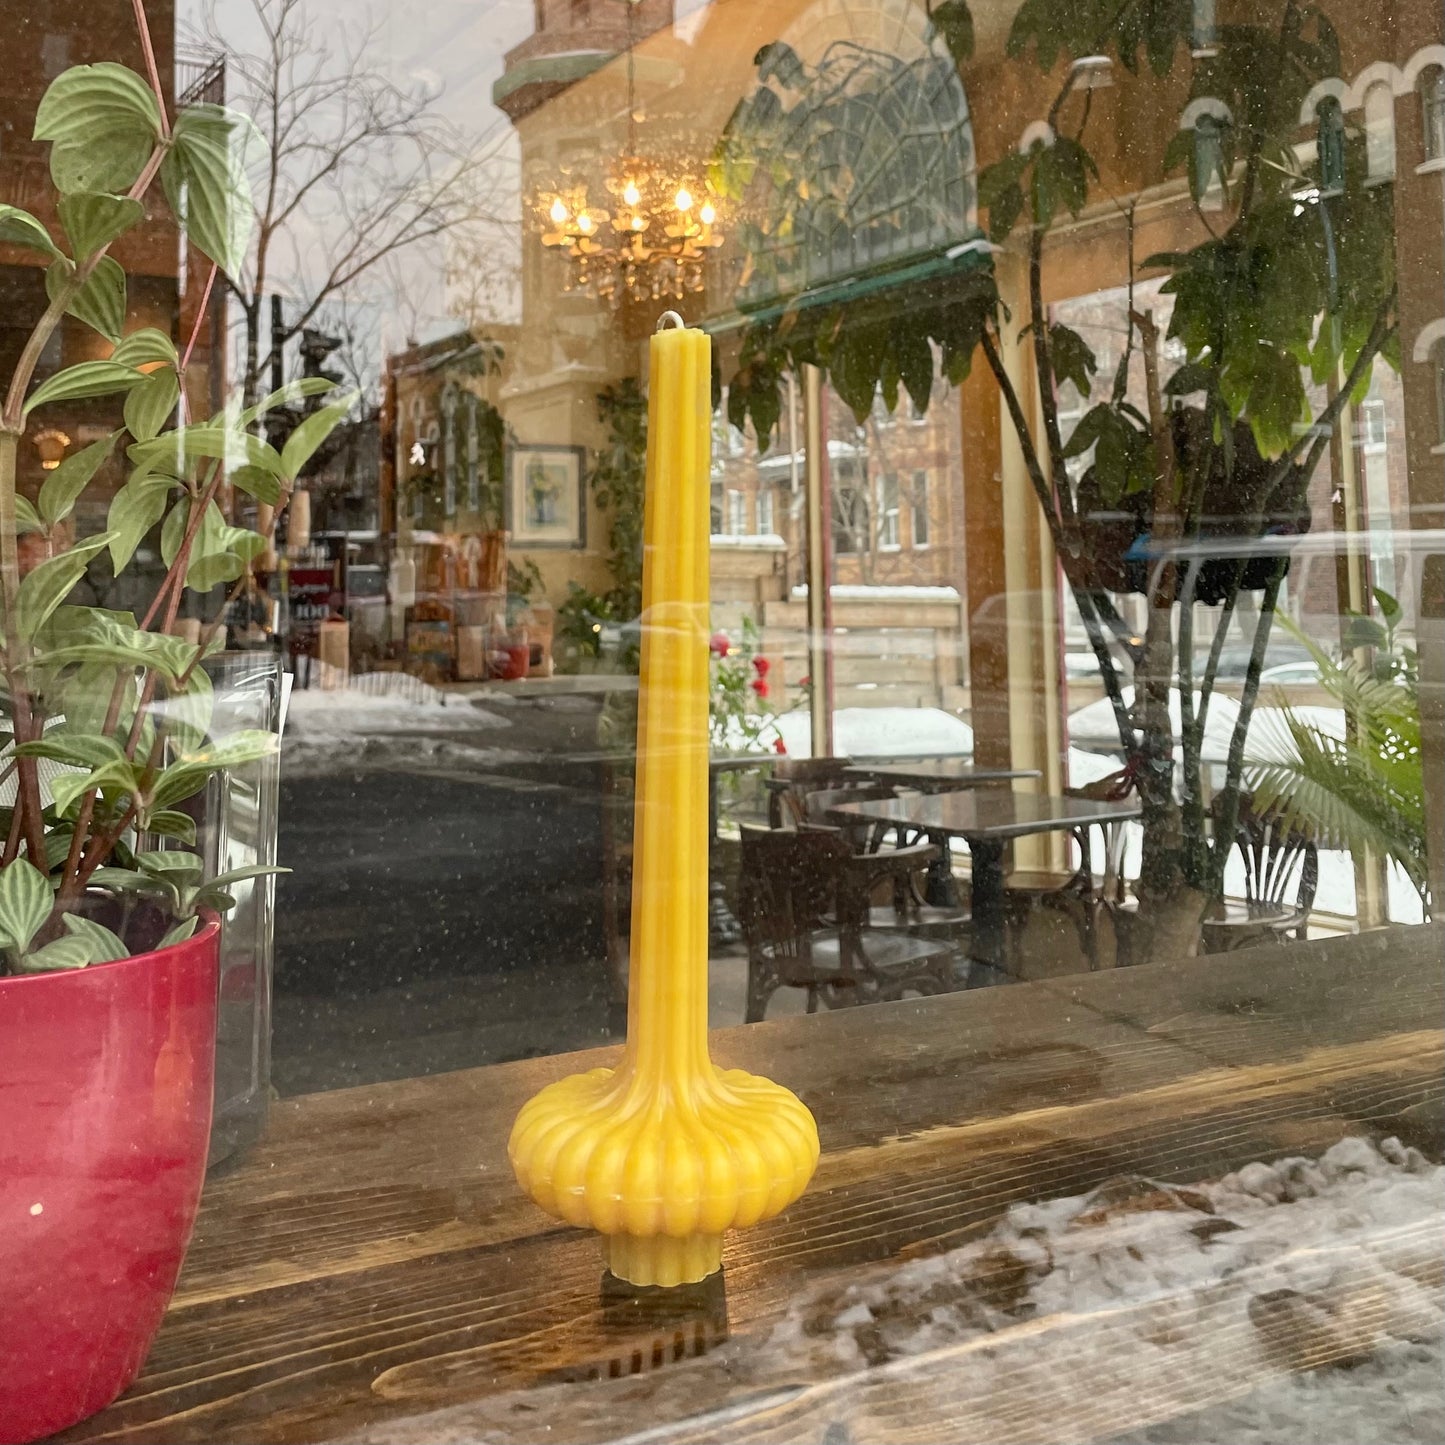 Lamp Candle - Beeswax Candle - Tall Fluted Taper // 12" tall, Candle